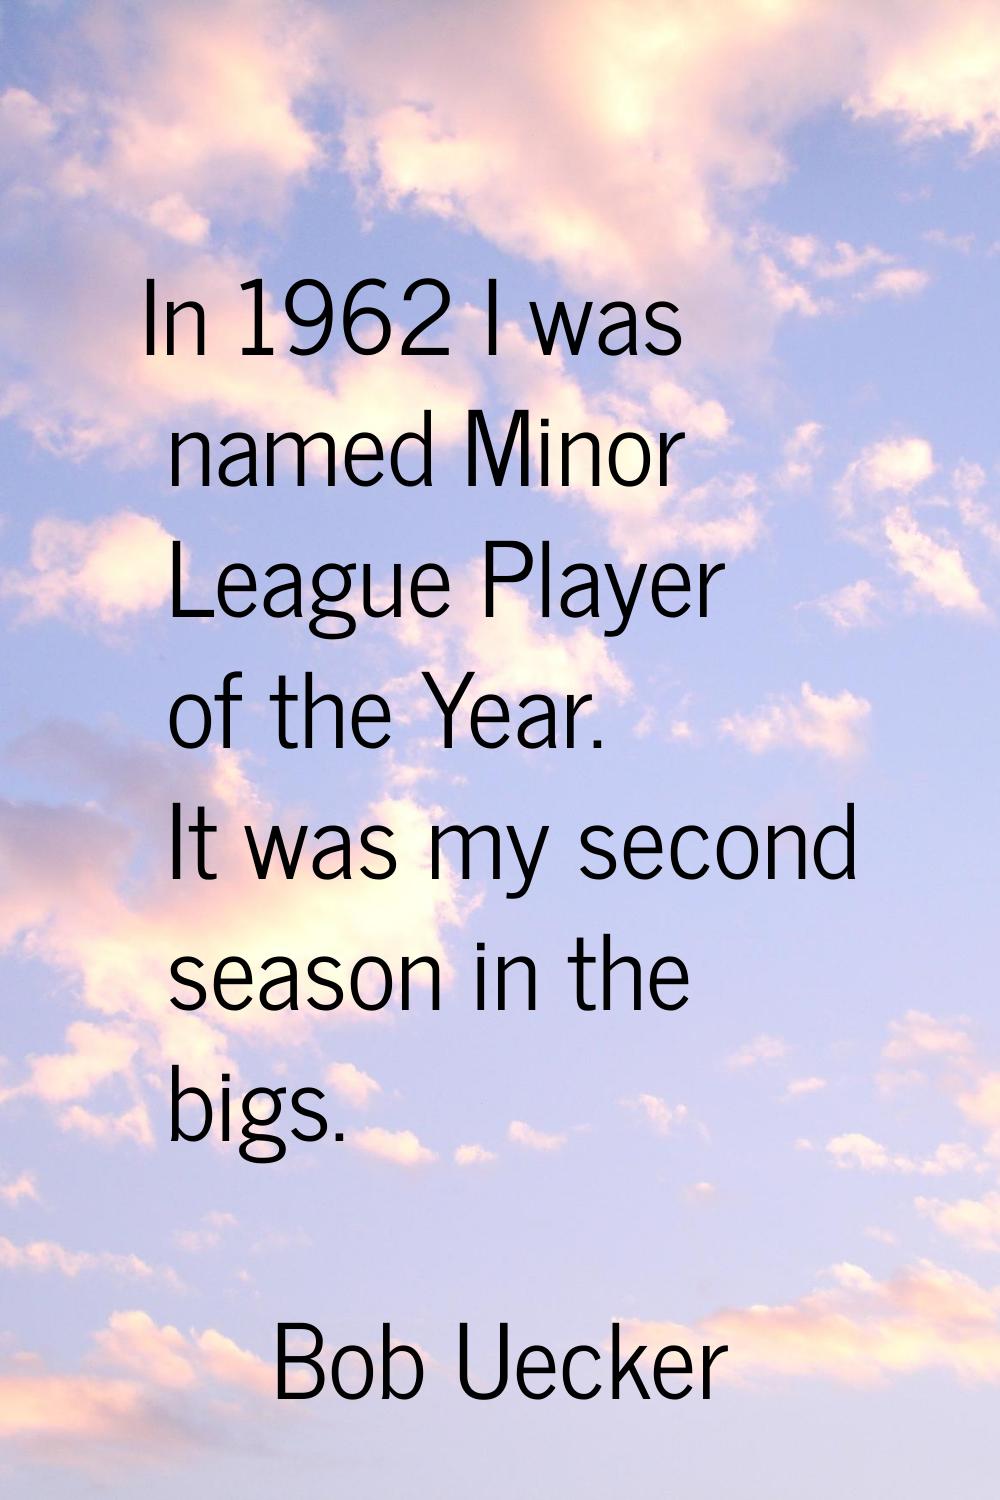 In 1962 I was named Minor League Player of the Year. It was my second season in the bigs.